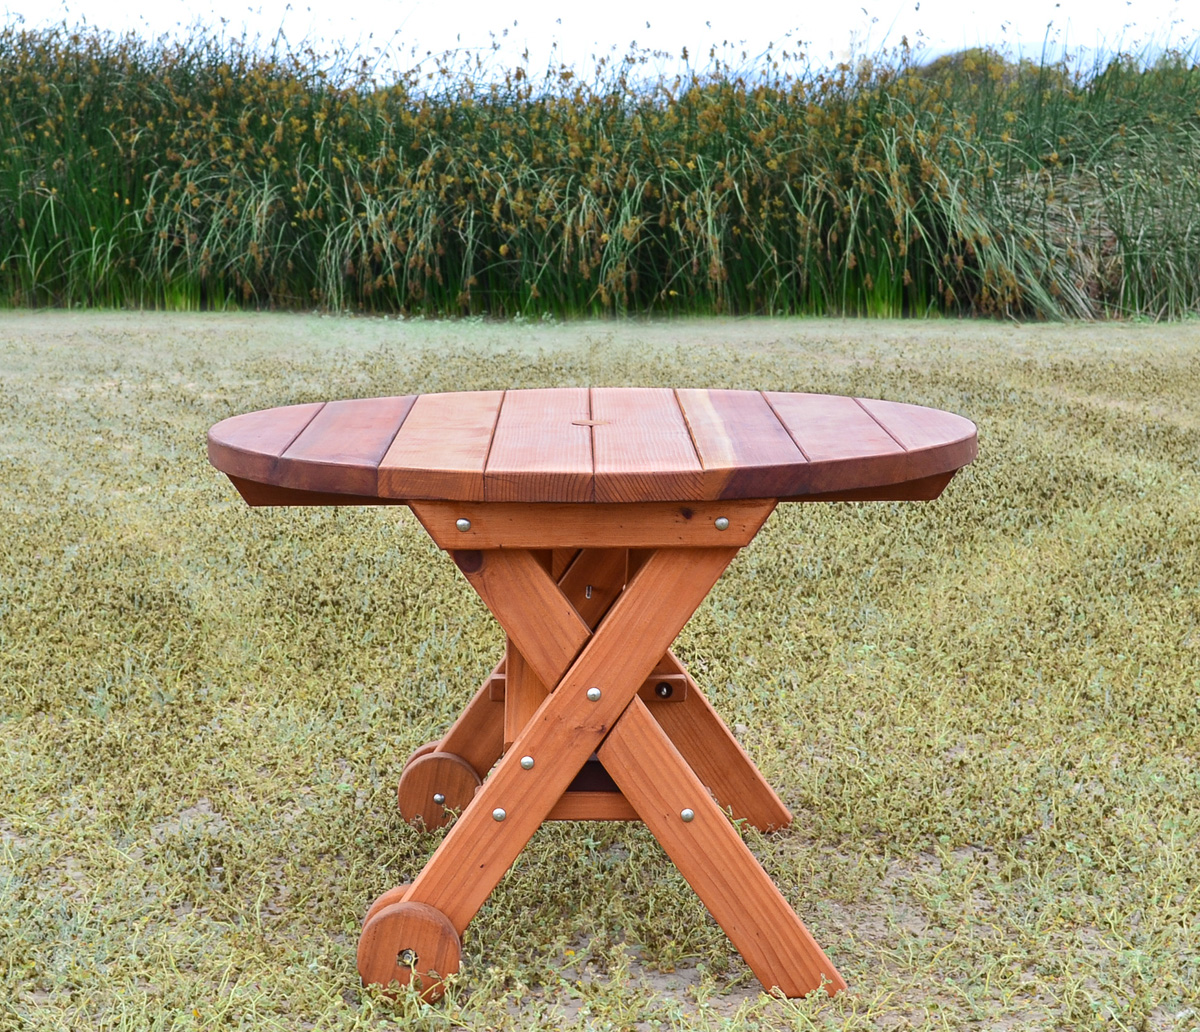 Portable Travel Picnic Table & Chairs - Wooden Style